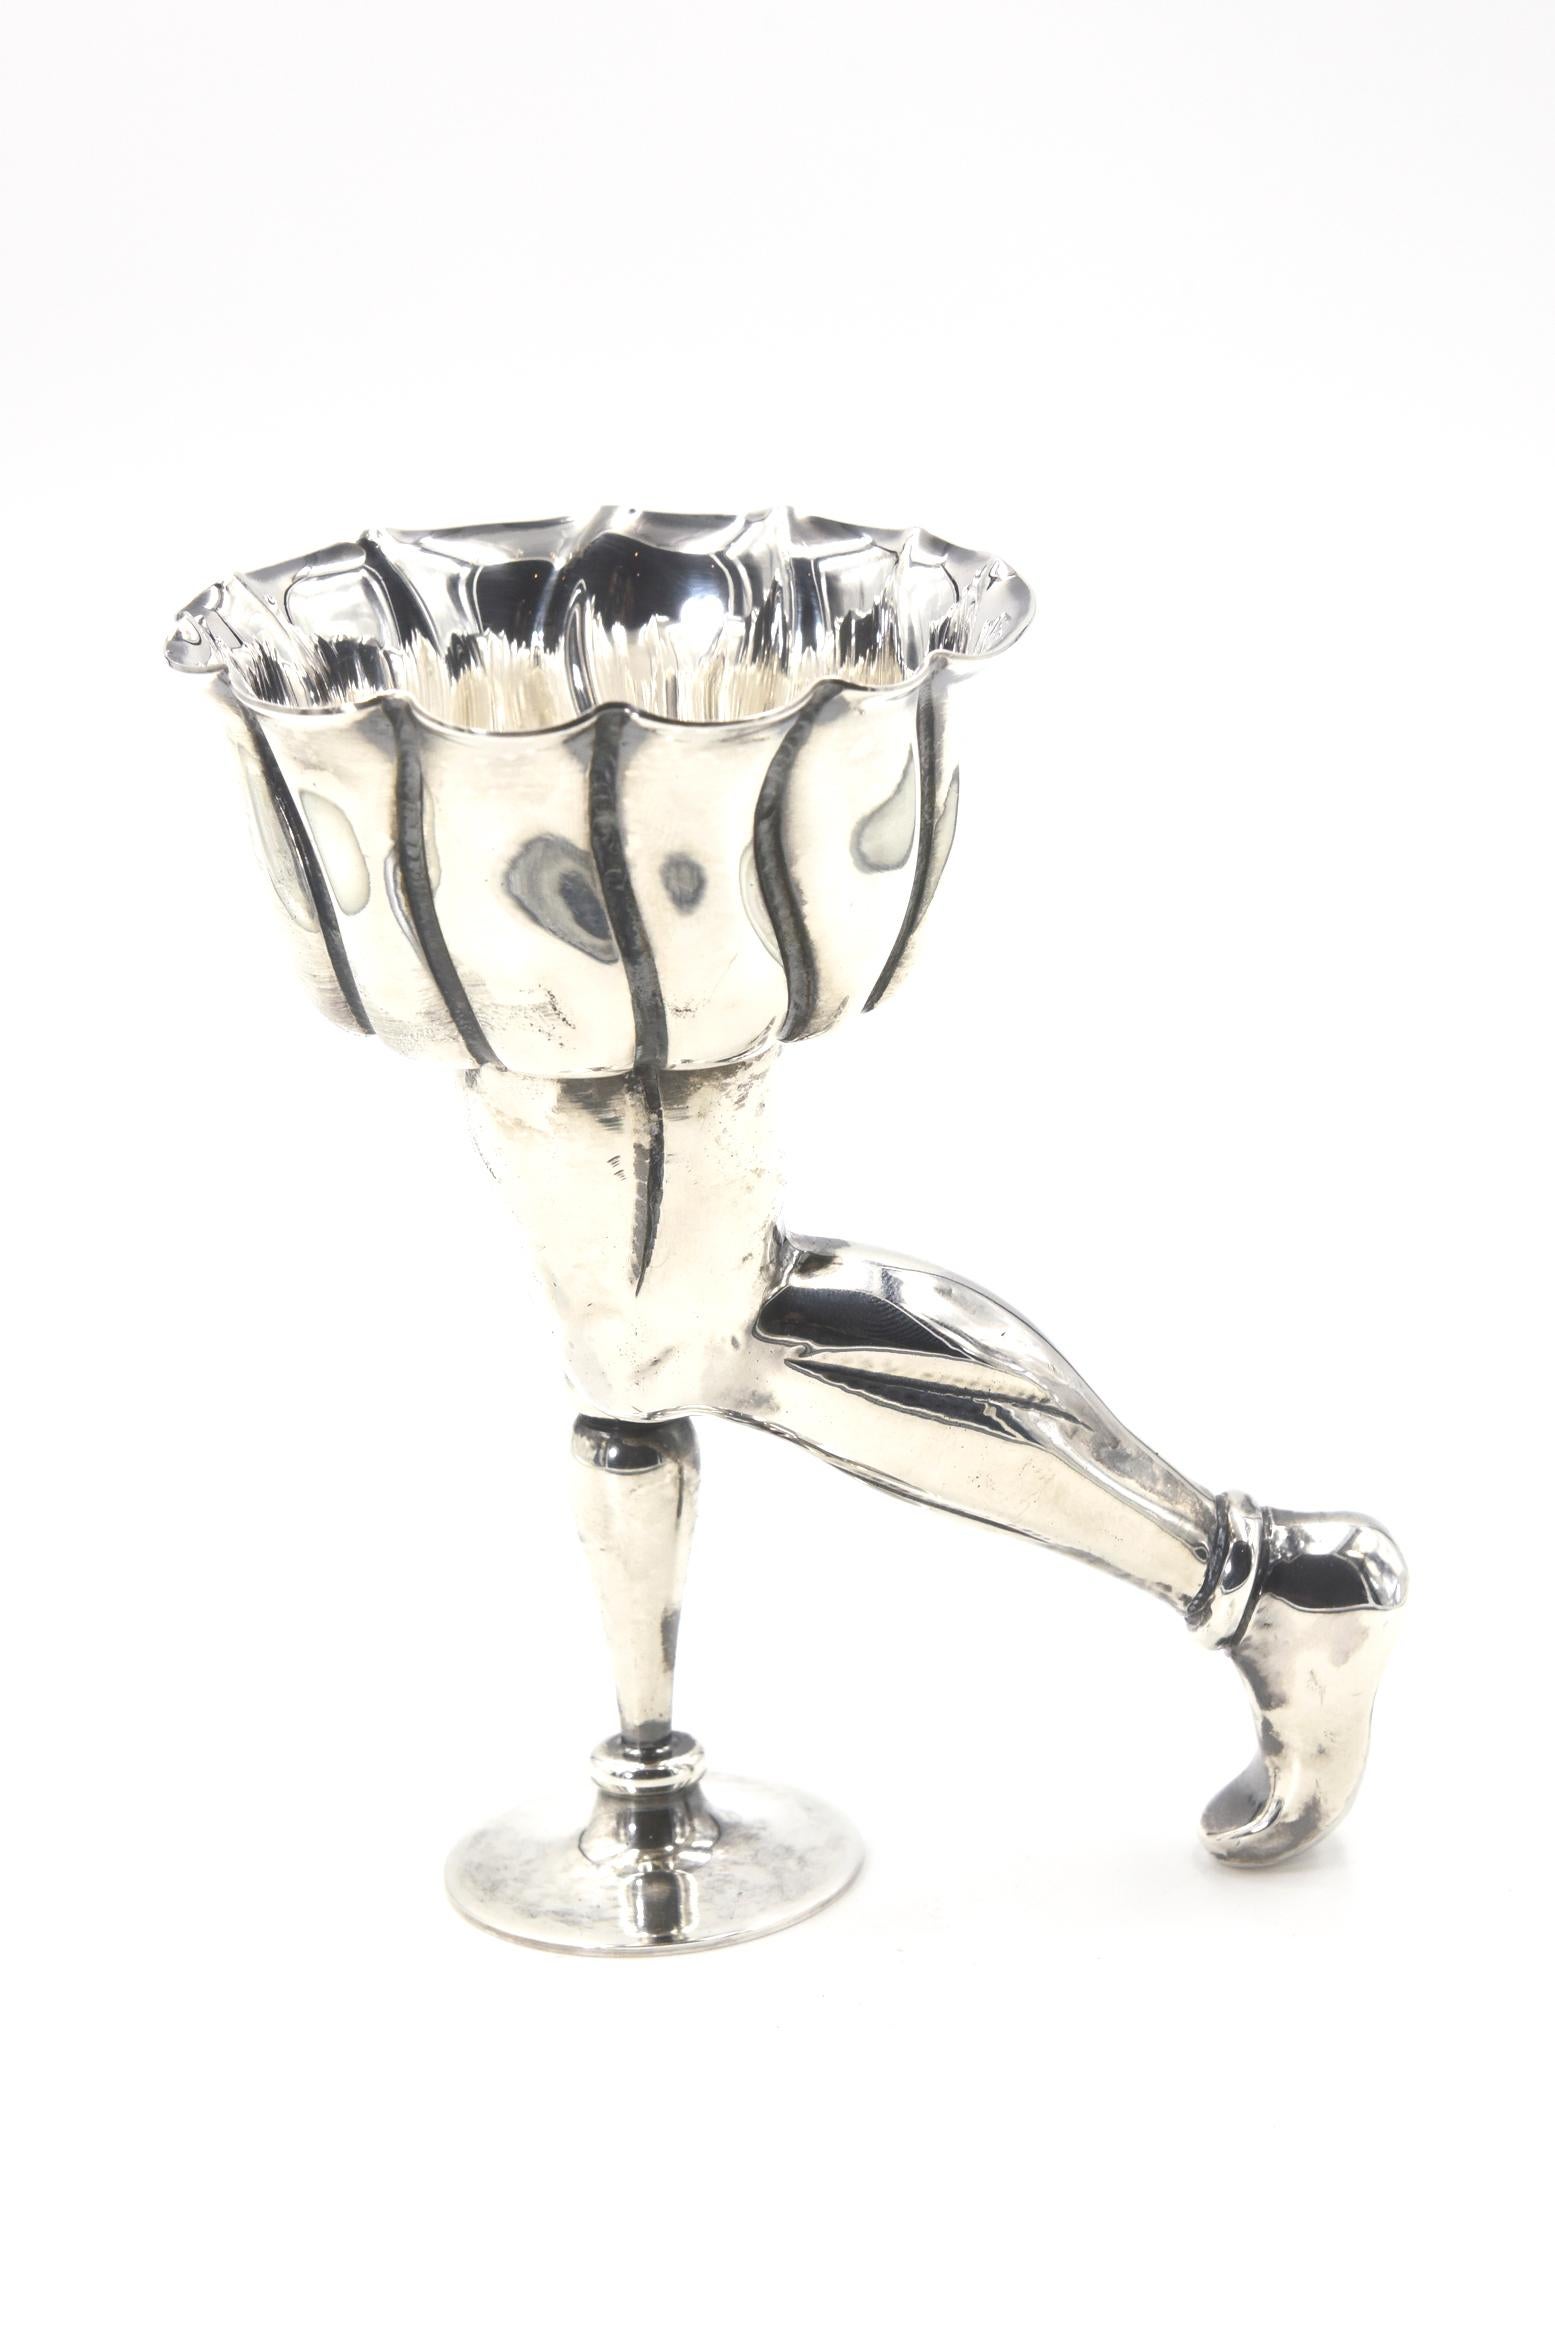 Interesting sterling silver figural footed wine cup made by Pampaloni silver from the Bichierografia collection which was inspired by the 17th century works of painter Giovanni Maggi. The scalloped cup are stands on legs one terminates in a foot the